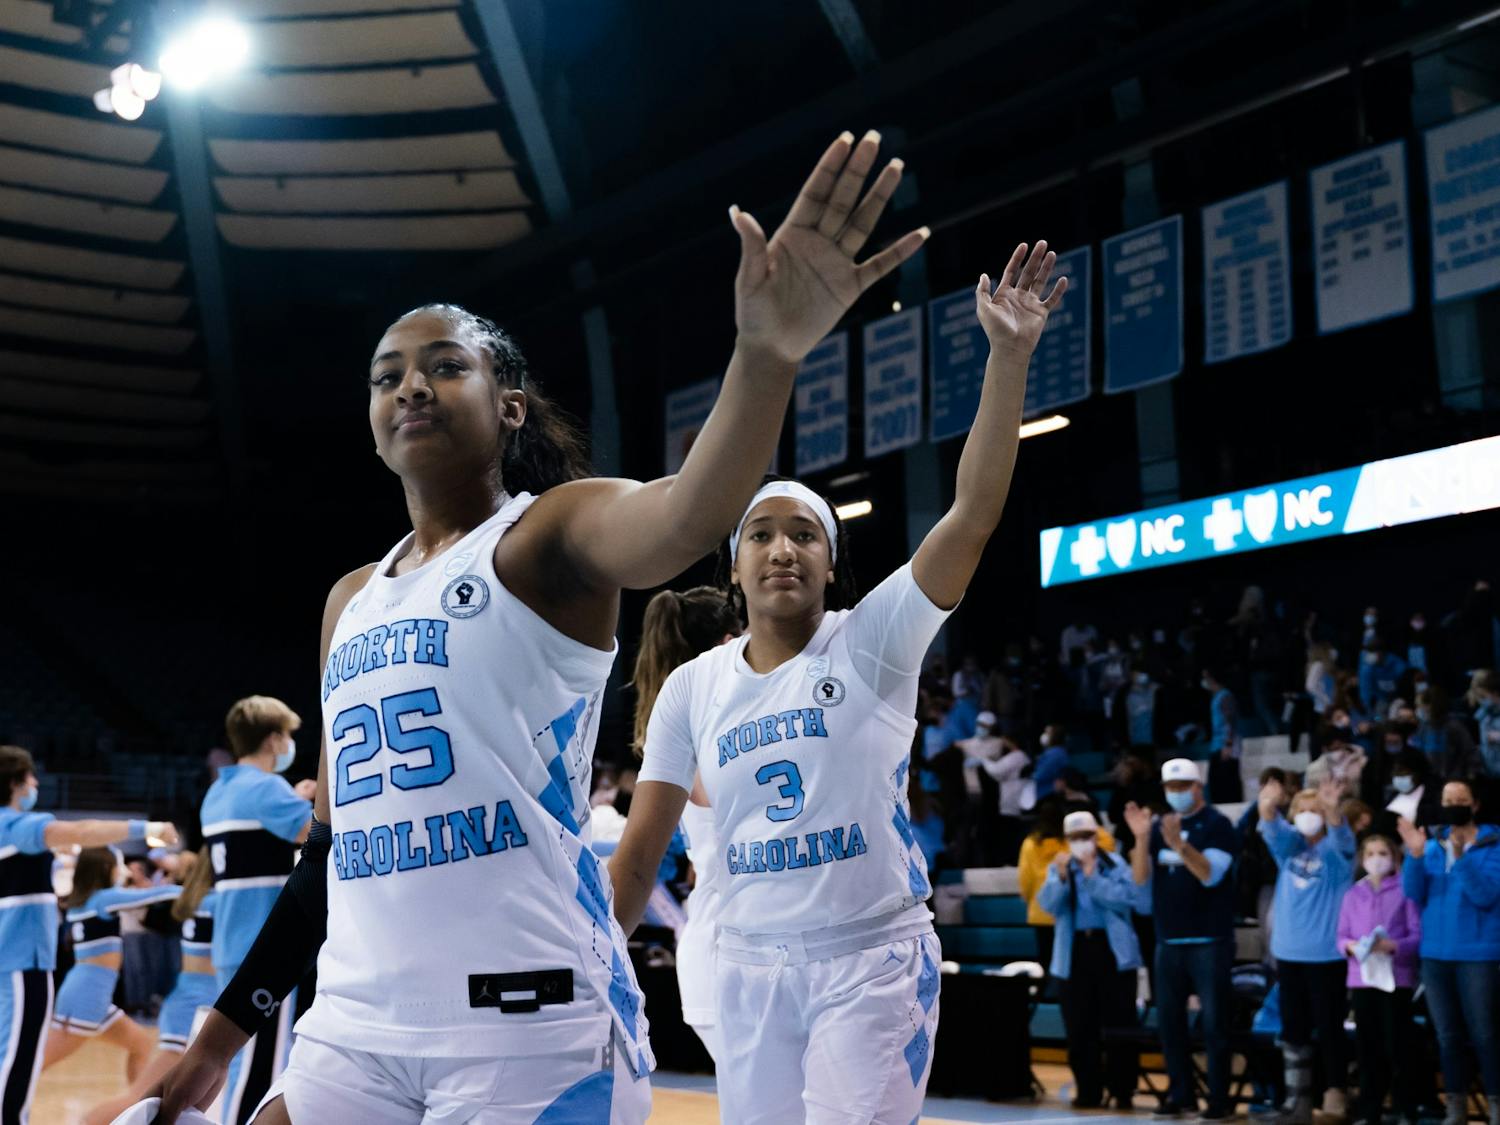 Sophomore guard and leading scorer of the night Deja Kelly (25) makes a free-throw against UVA  Friday, Jan. 20, 2022, in Carmichael Arena. UNC won 61-52, and Kelly finished the night as the leading scorer with 18 points.